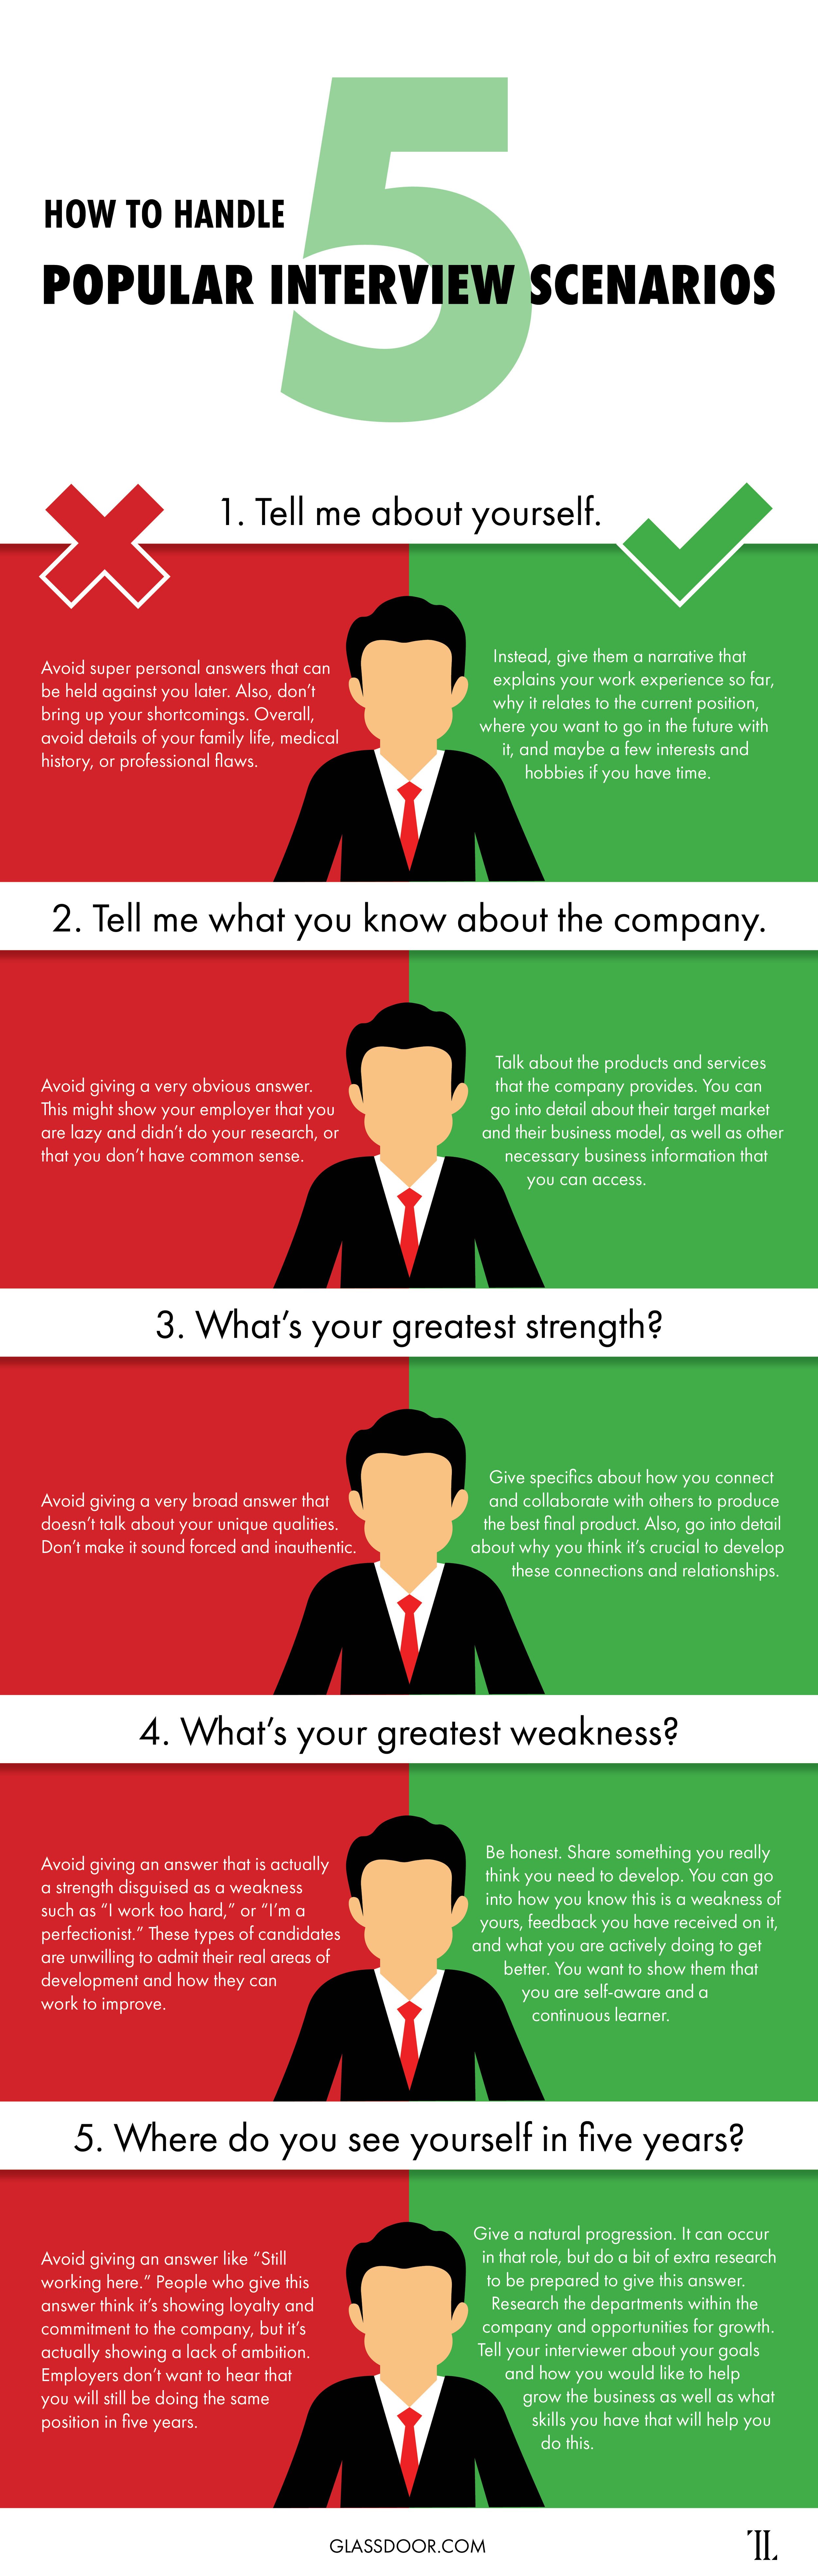 These are the best and worst ways to answer the top five most popular interview questions.